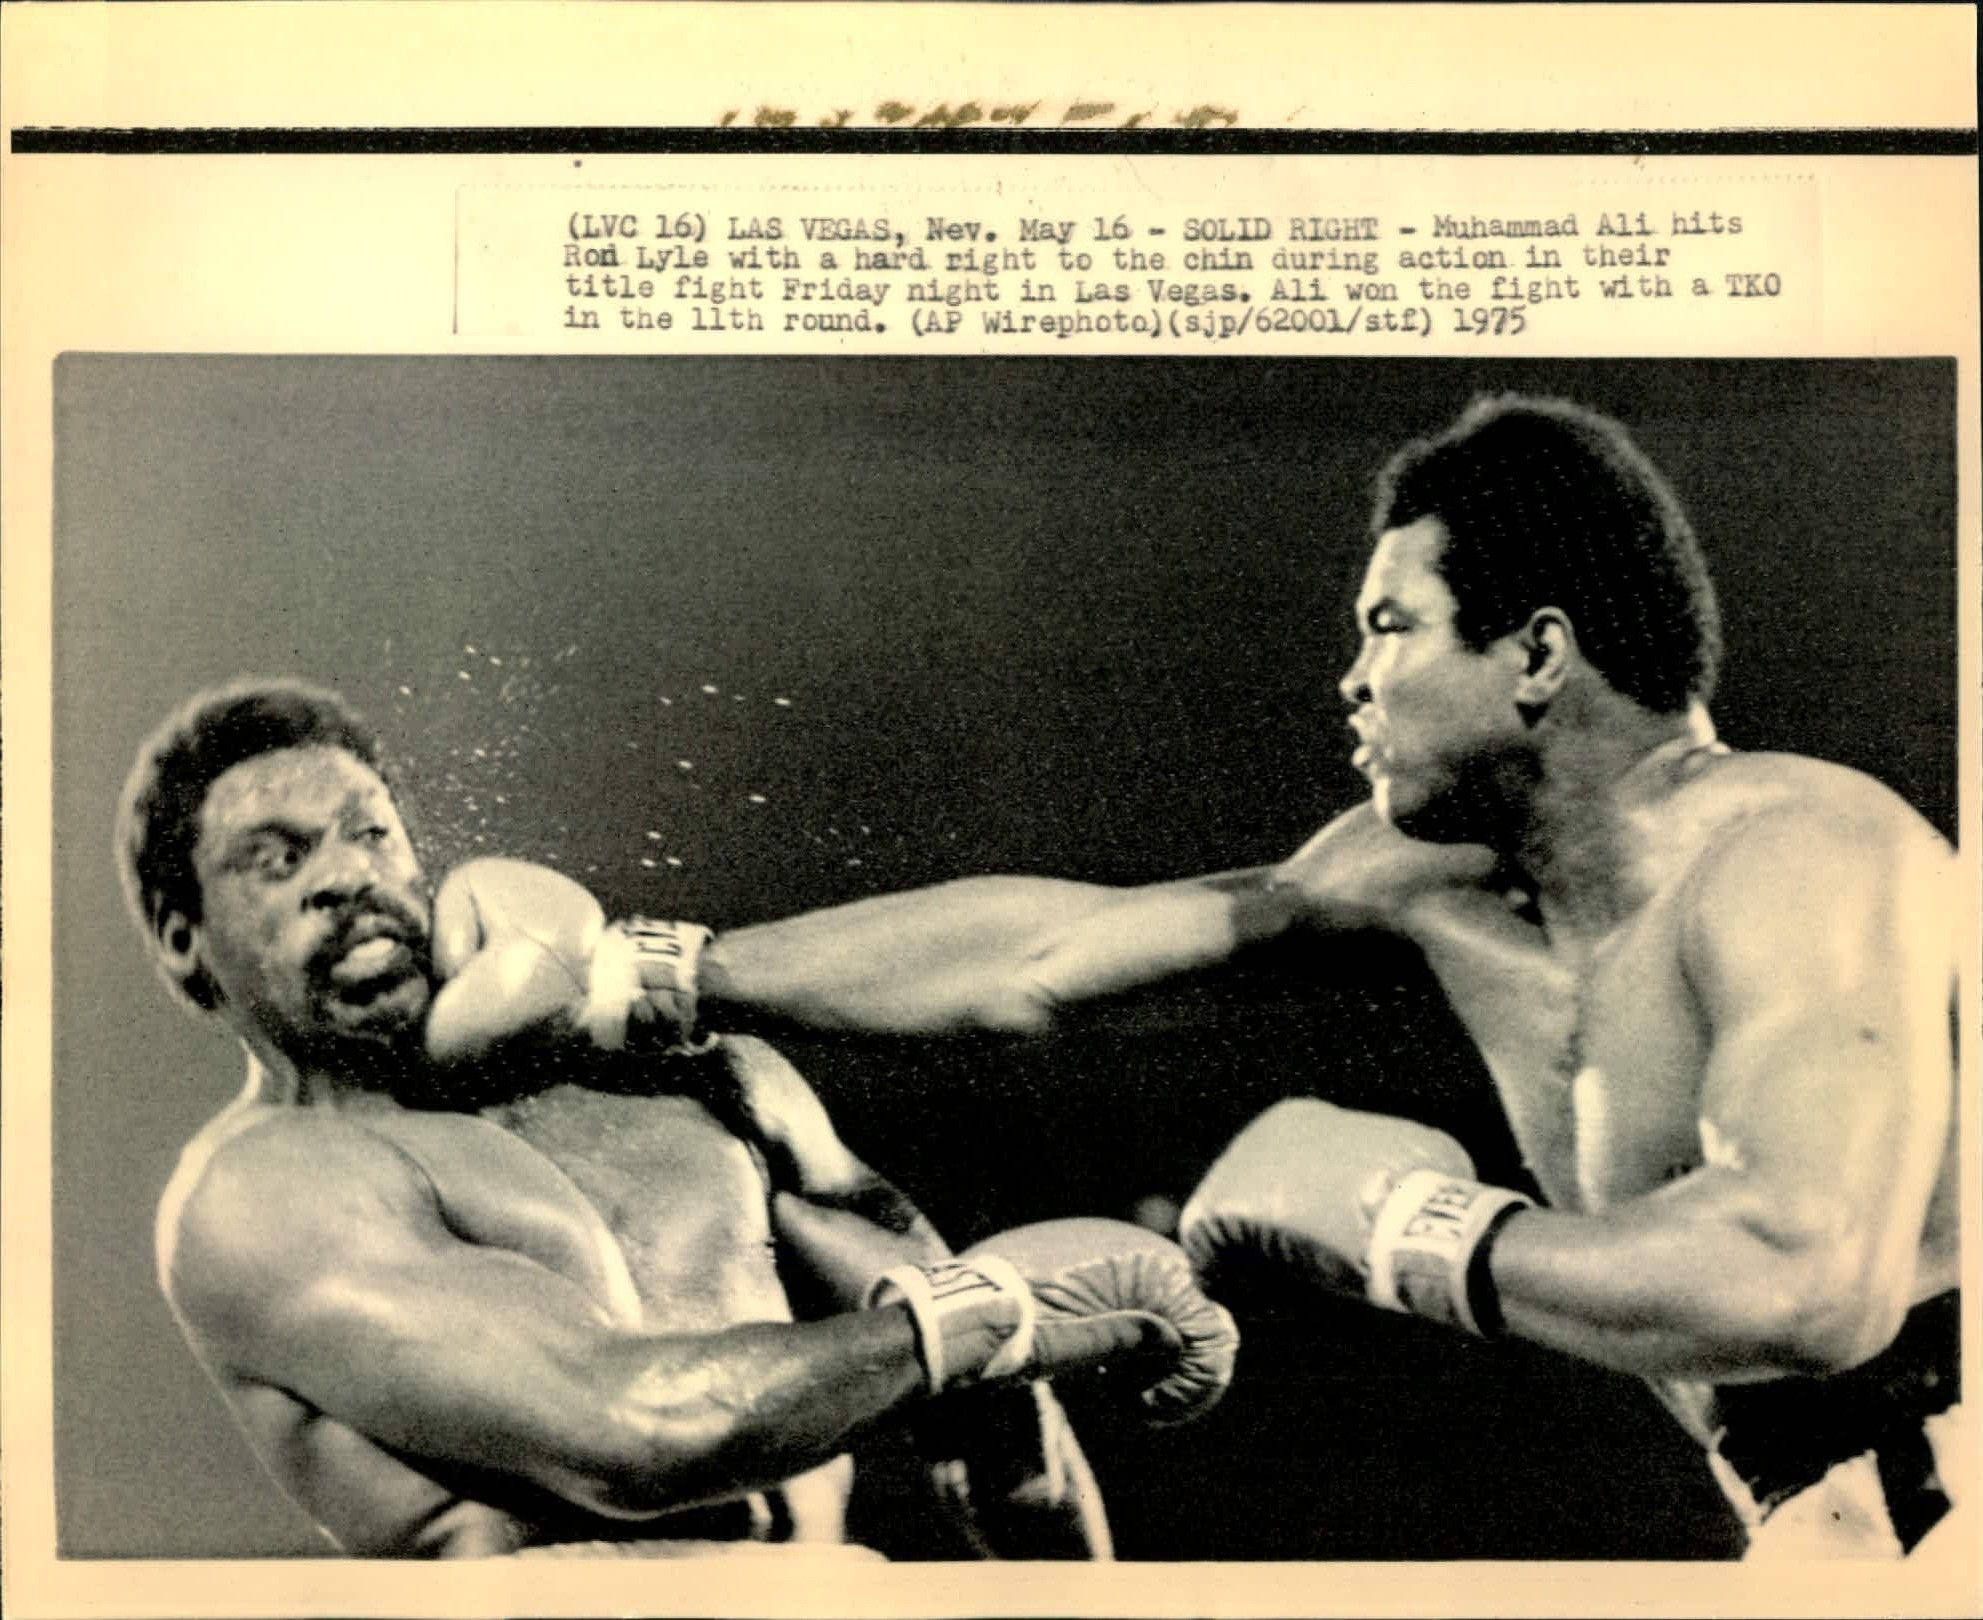 Lot Detail 1975 Muhammad Ali Ron Lyle Las Vegas Title Fight The Chicago Sun Times Collection Archives Original Photo Chicago Sun Times Hologram Mears Photo Loa